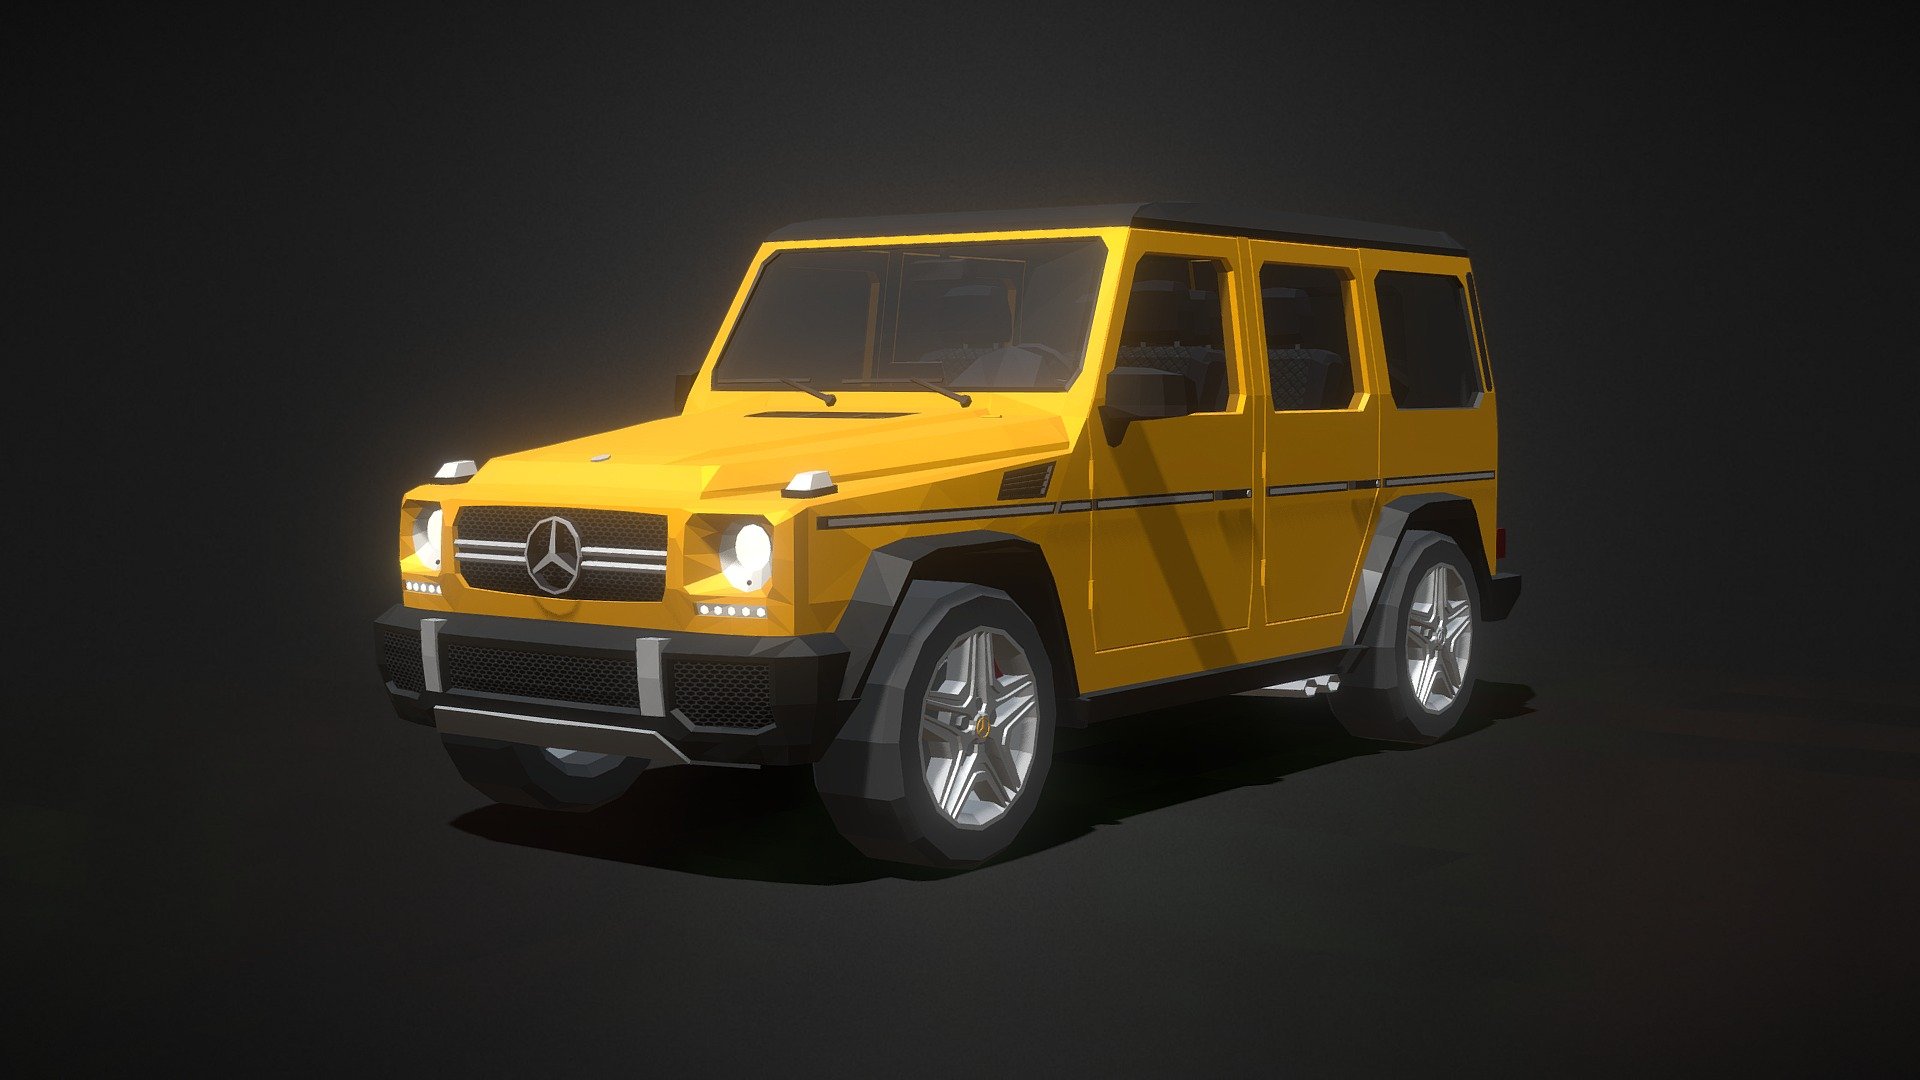 Mercedes-Benz G65 AMG (W463)
Low Poly style
10.237 polys - Mercedes-Benz G65 AMG (W463) - 3D model by ShaposhnikovG 3d model